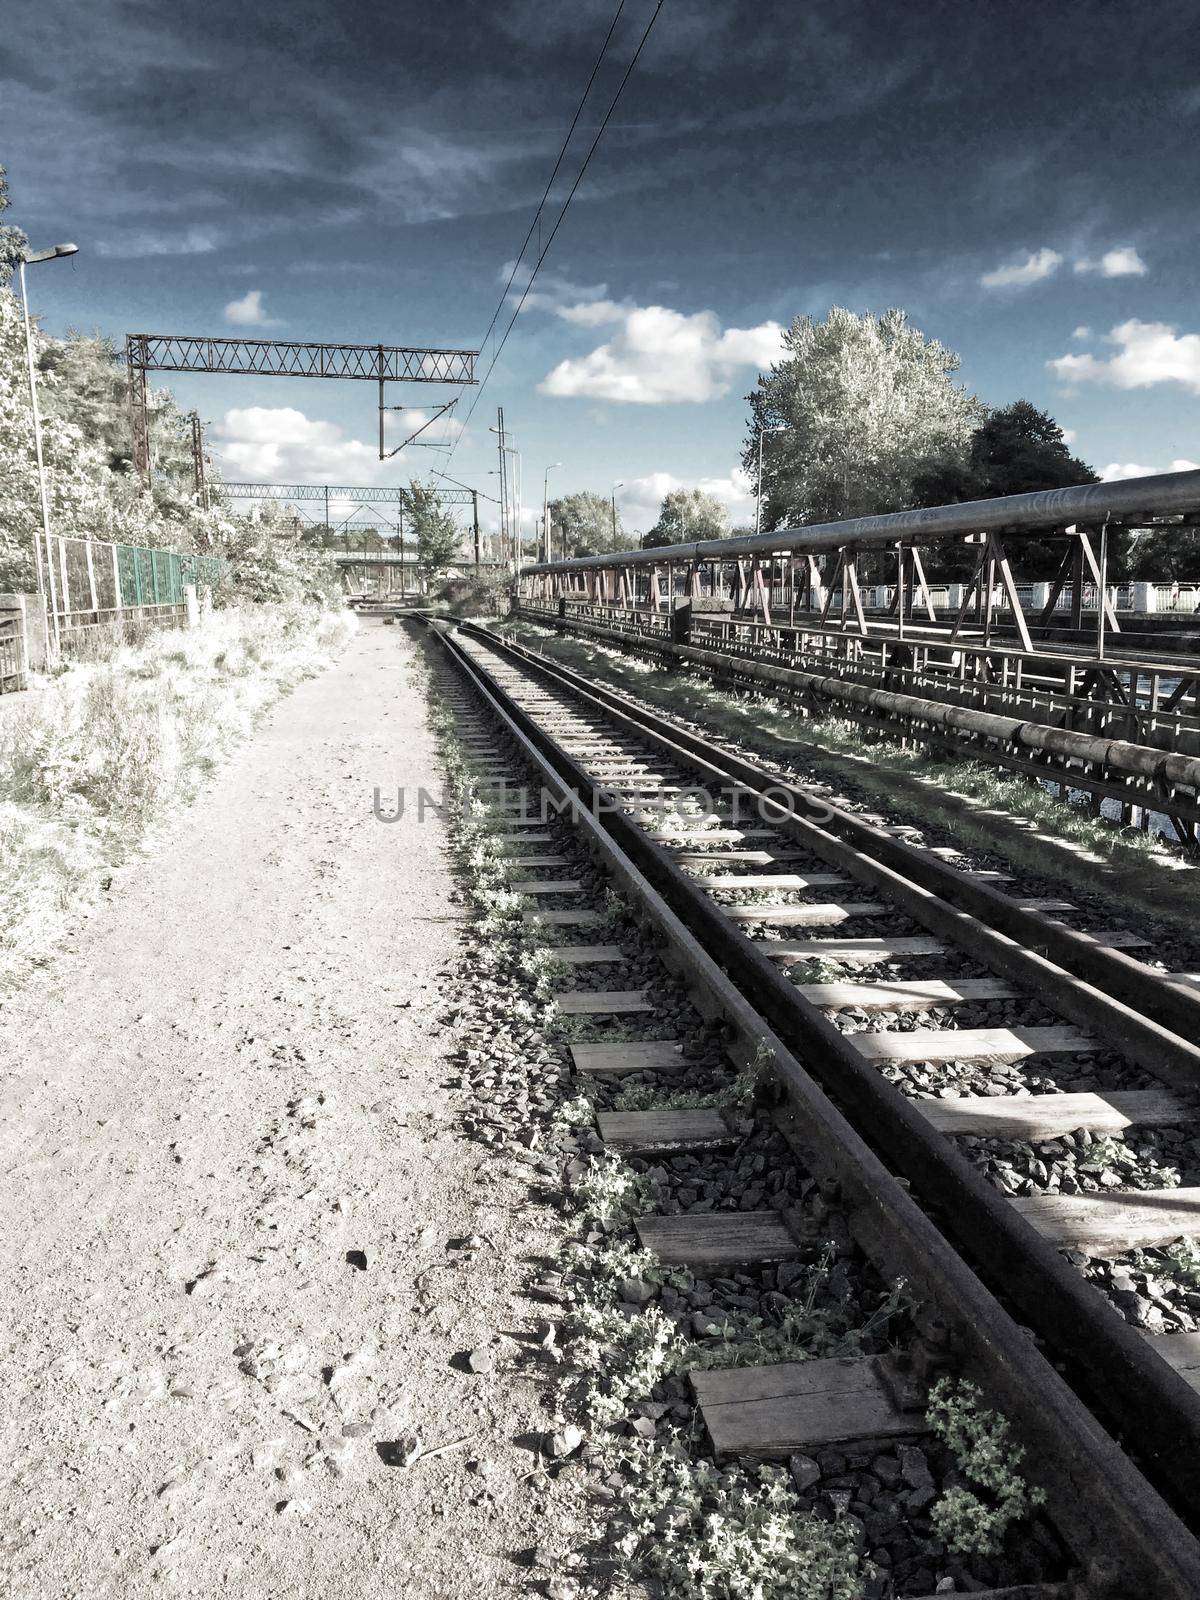 rails out of order in an infrared photo by Jochen